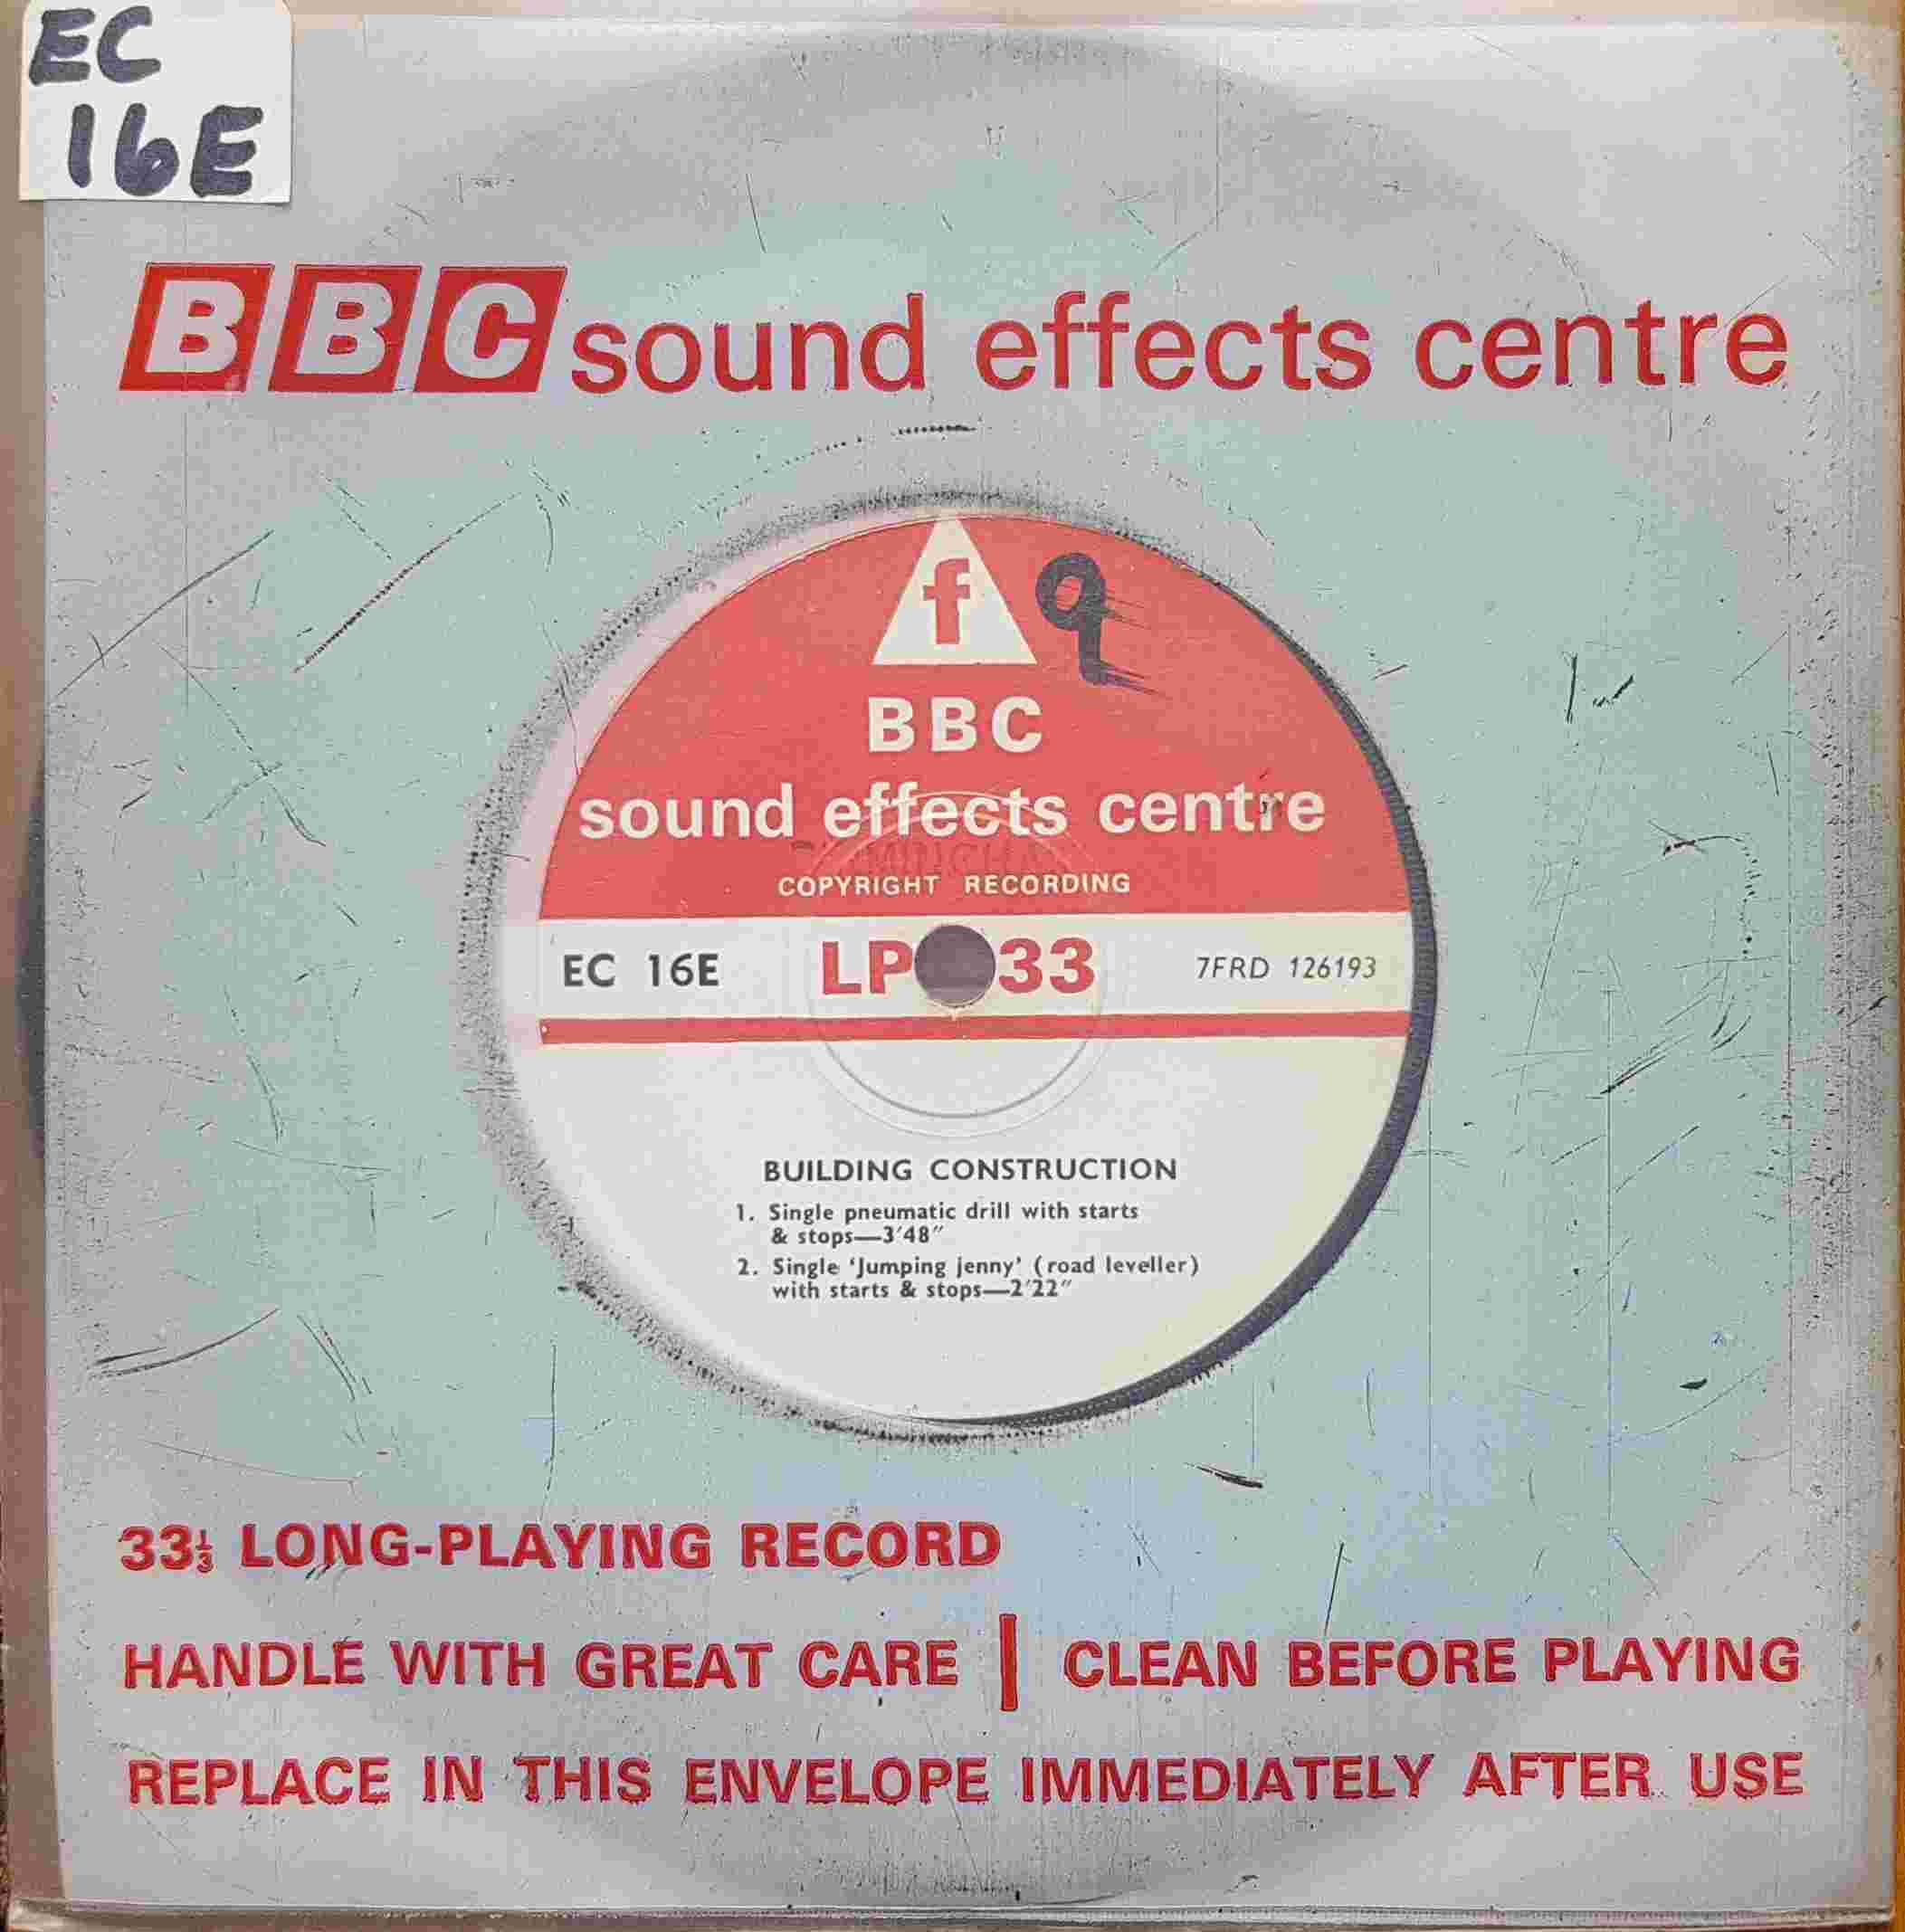 Picture of EC 16E Building construction by artist Not registered from the BBC singles - Records and Tapes library